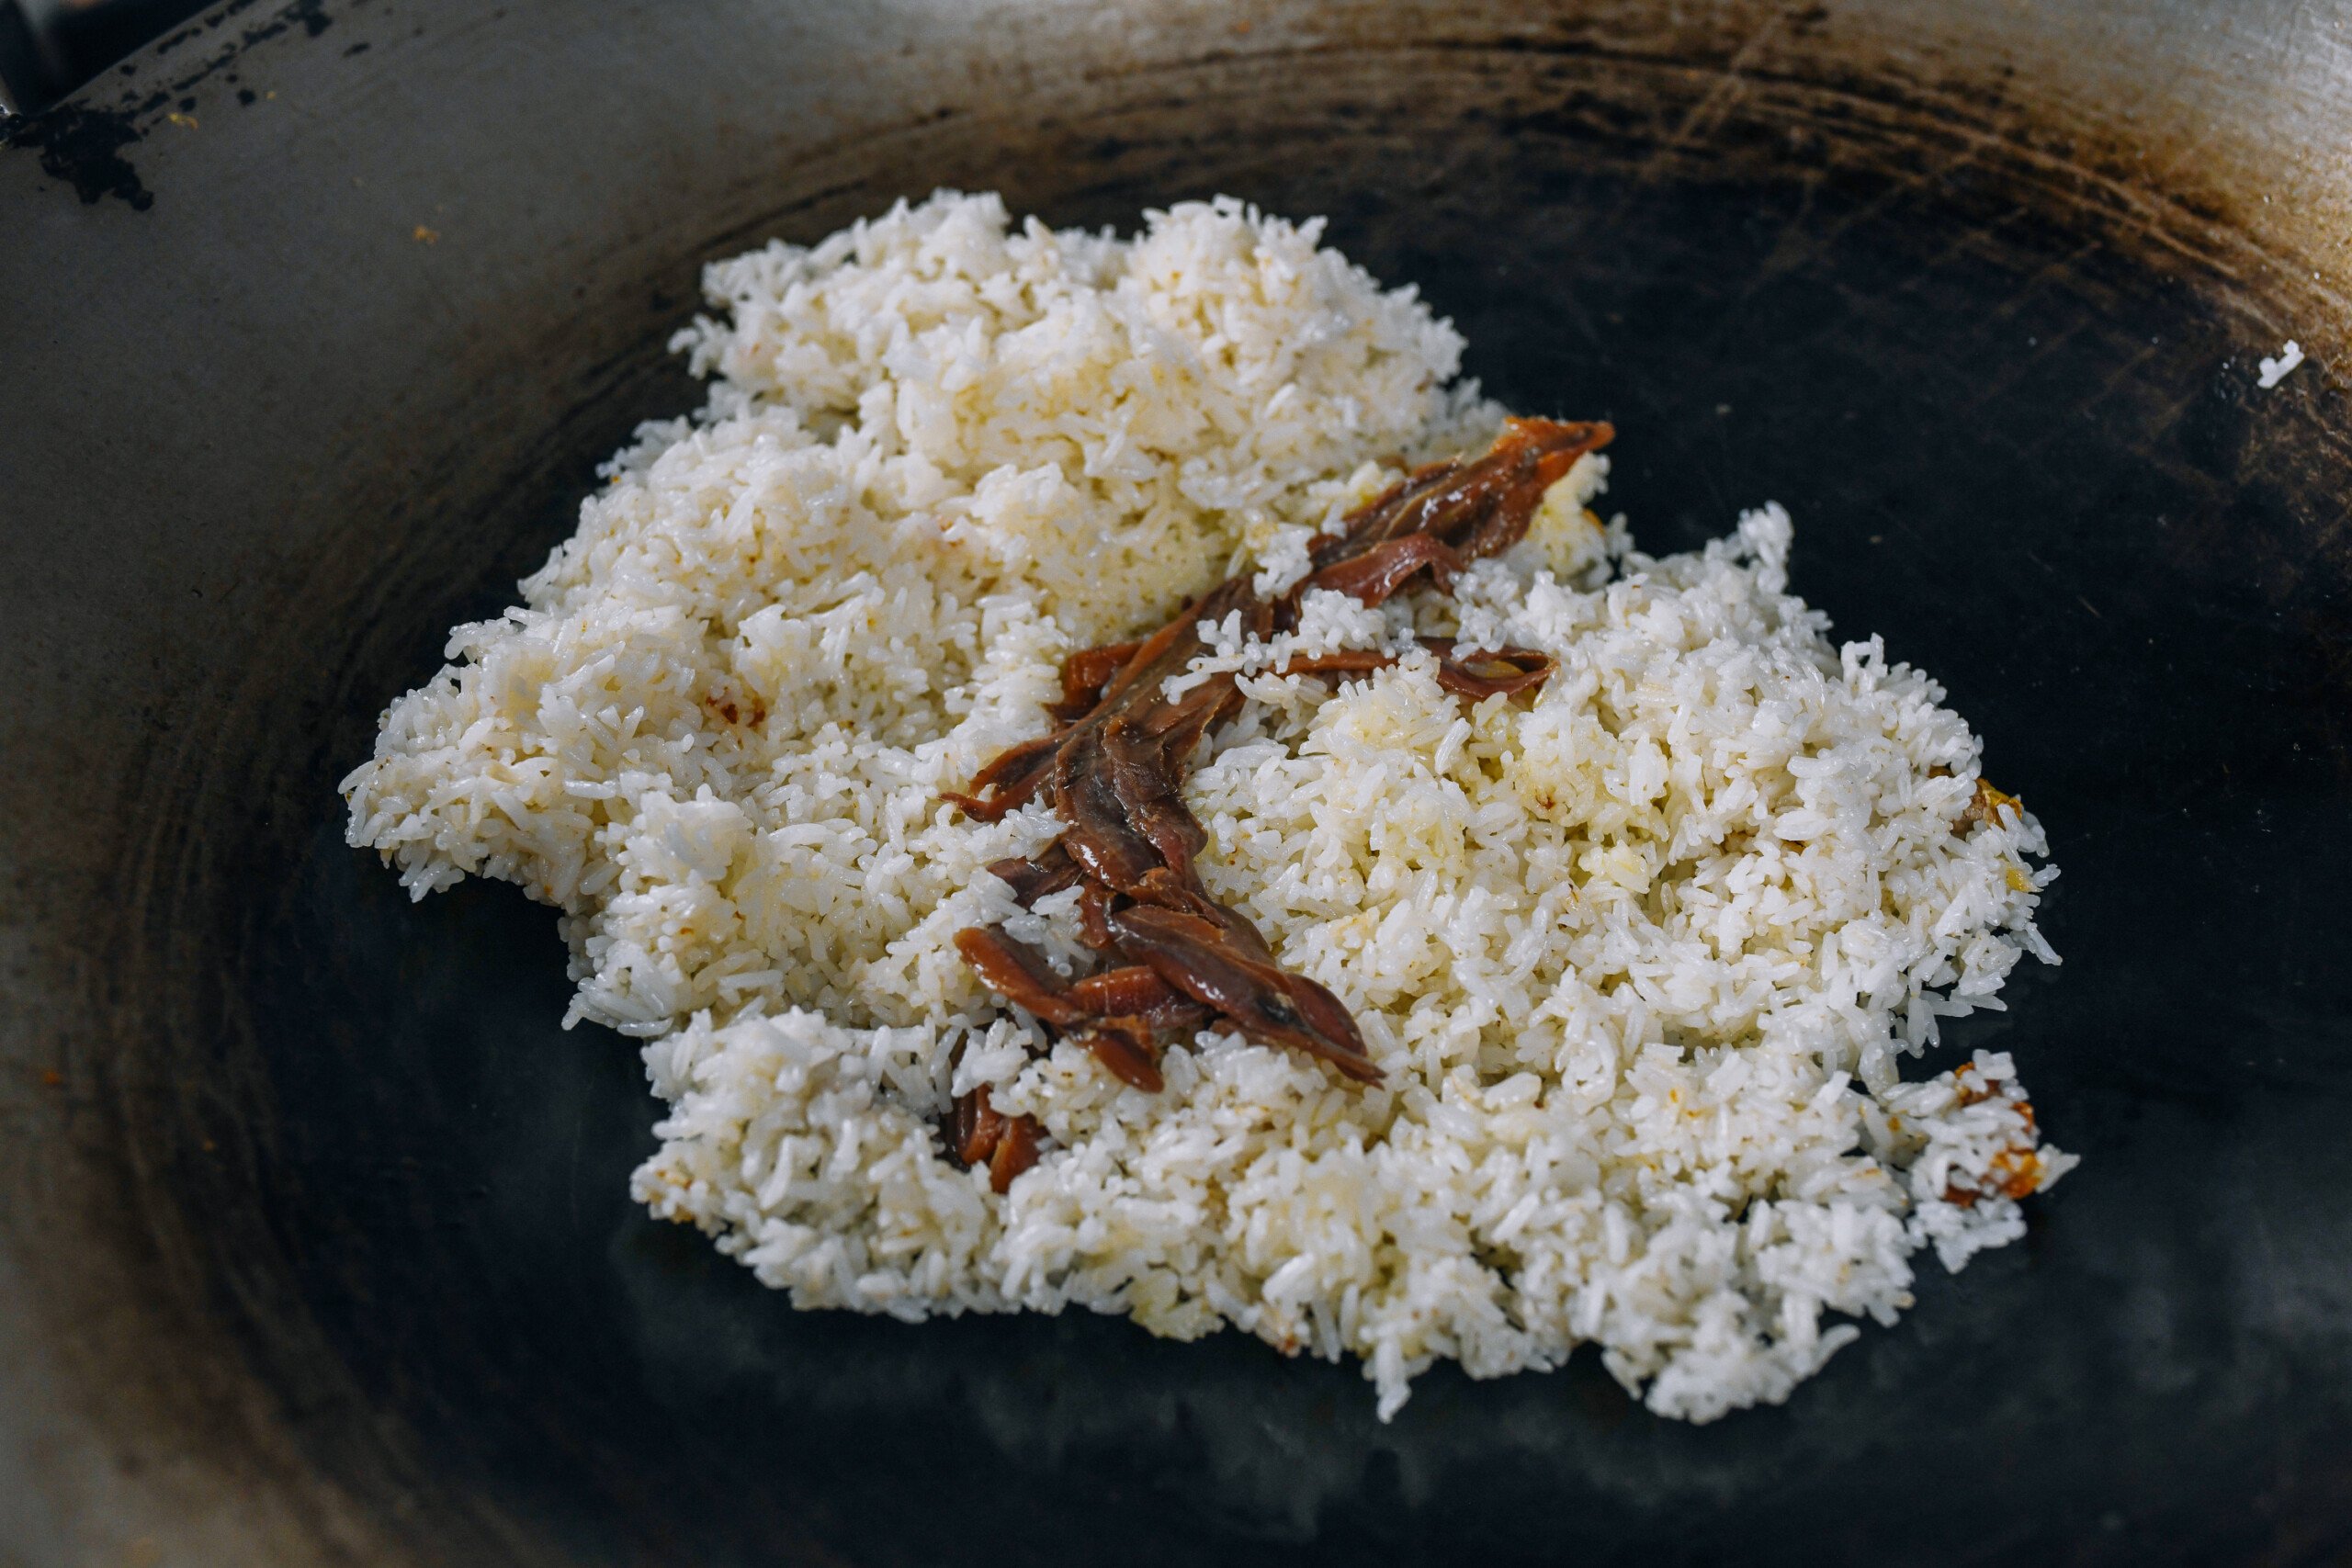 anchovy fillets in rice